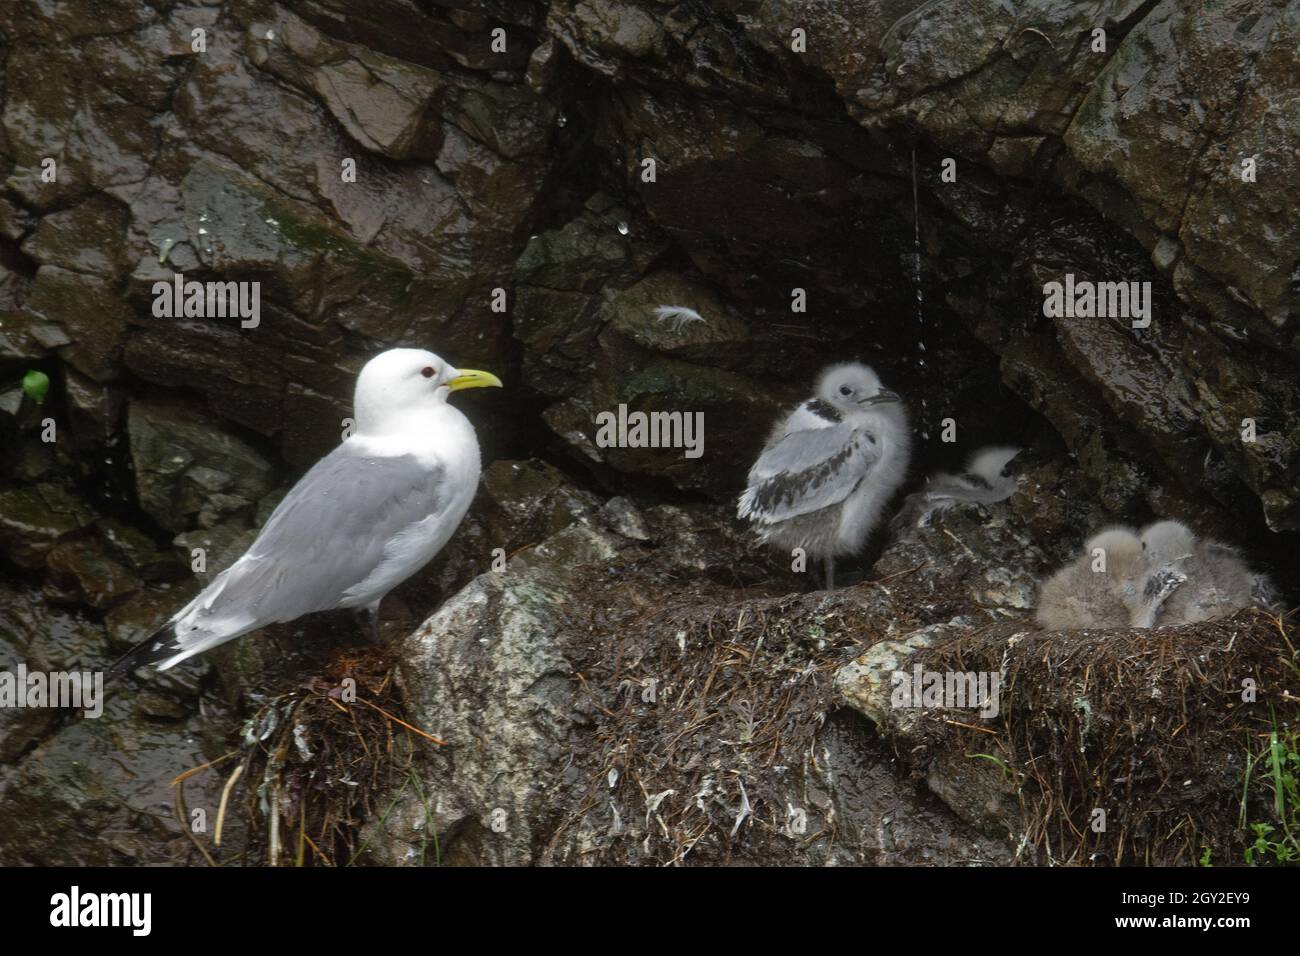 Glaucous wnged gulls, Larus glaucescens, with chicks in a nest, Cheval Island, Kenai Fjords National Park, Alaska, USA Stock Photo